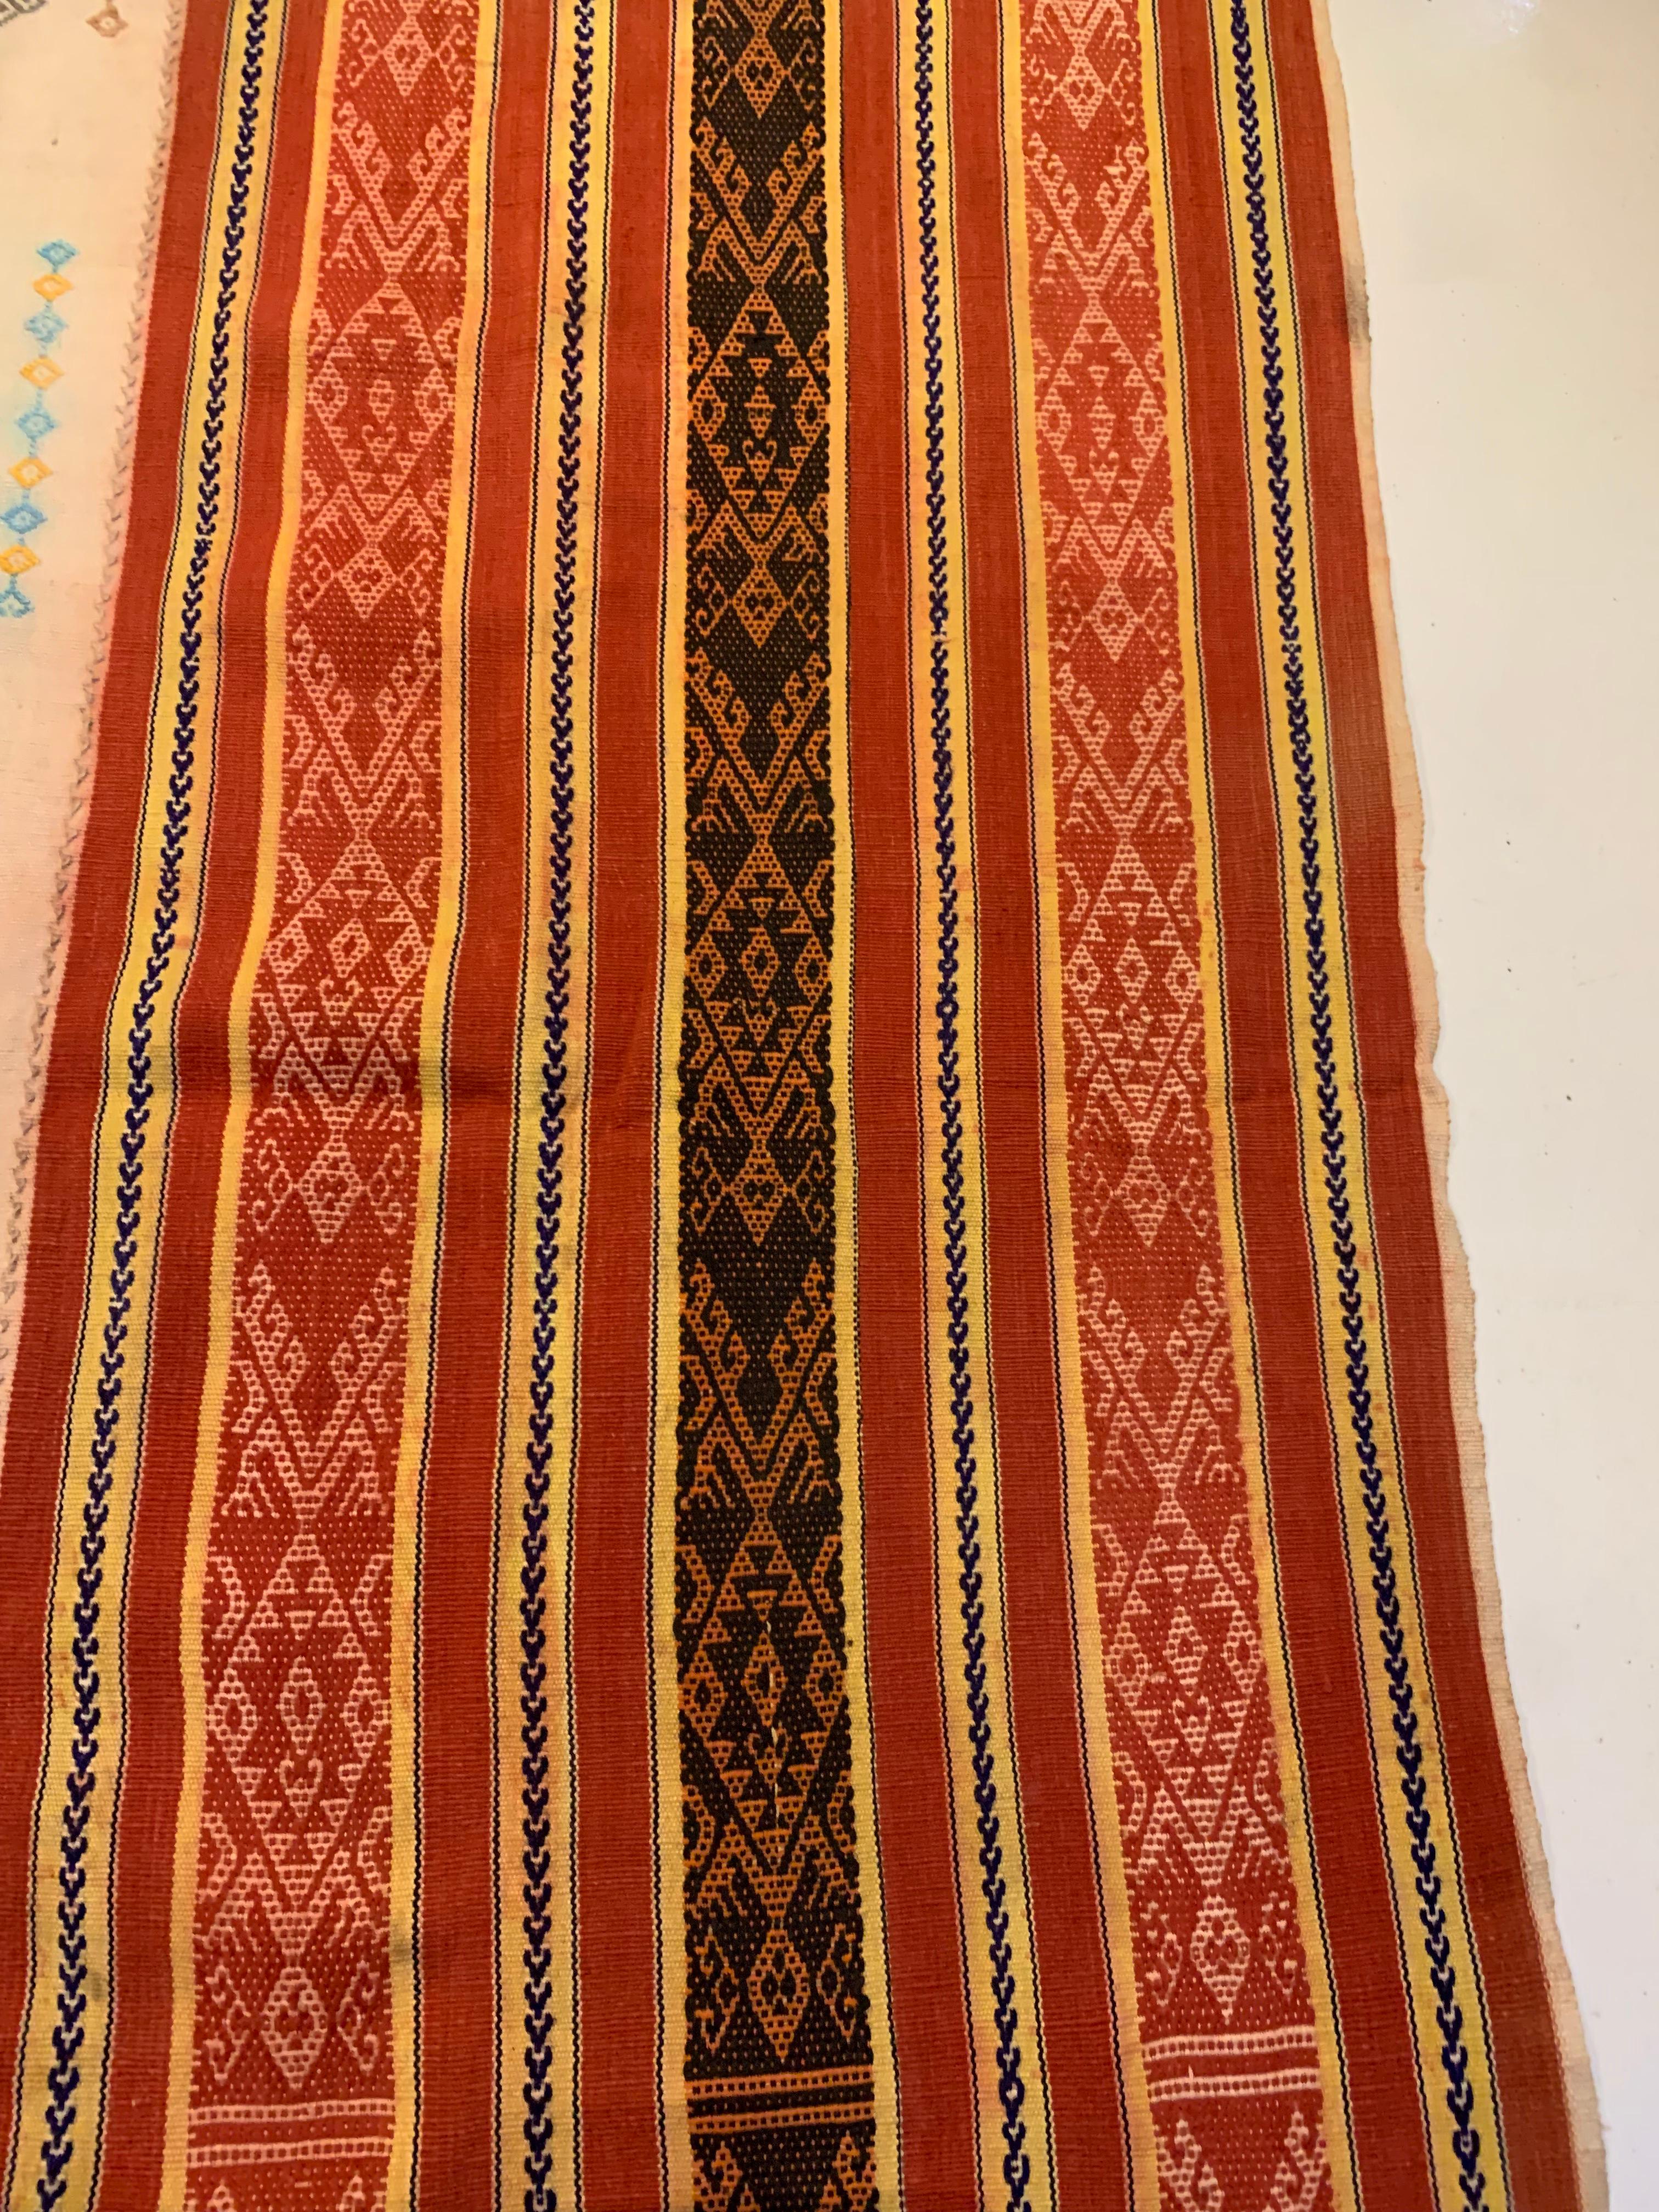 Ikat Textile from Timor Stunning Tribal Motifs & Colors, Indonesia c. 1950 For Sale 1